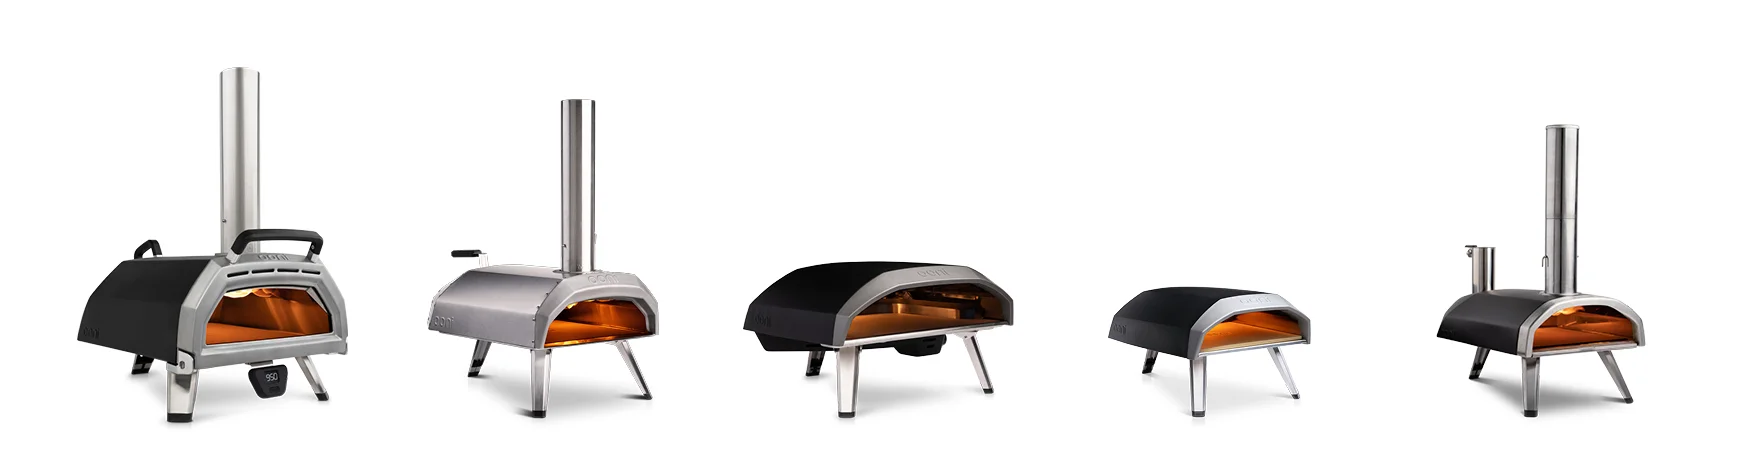 Ooni Pizza Oven Comparison - Whats the differences?